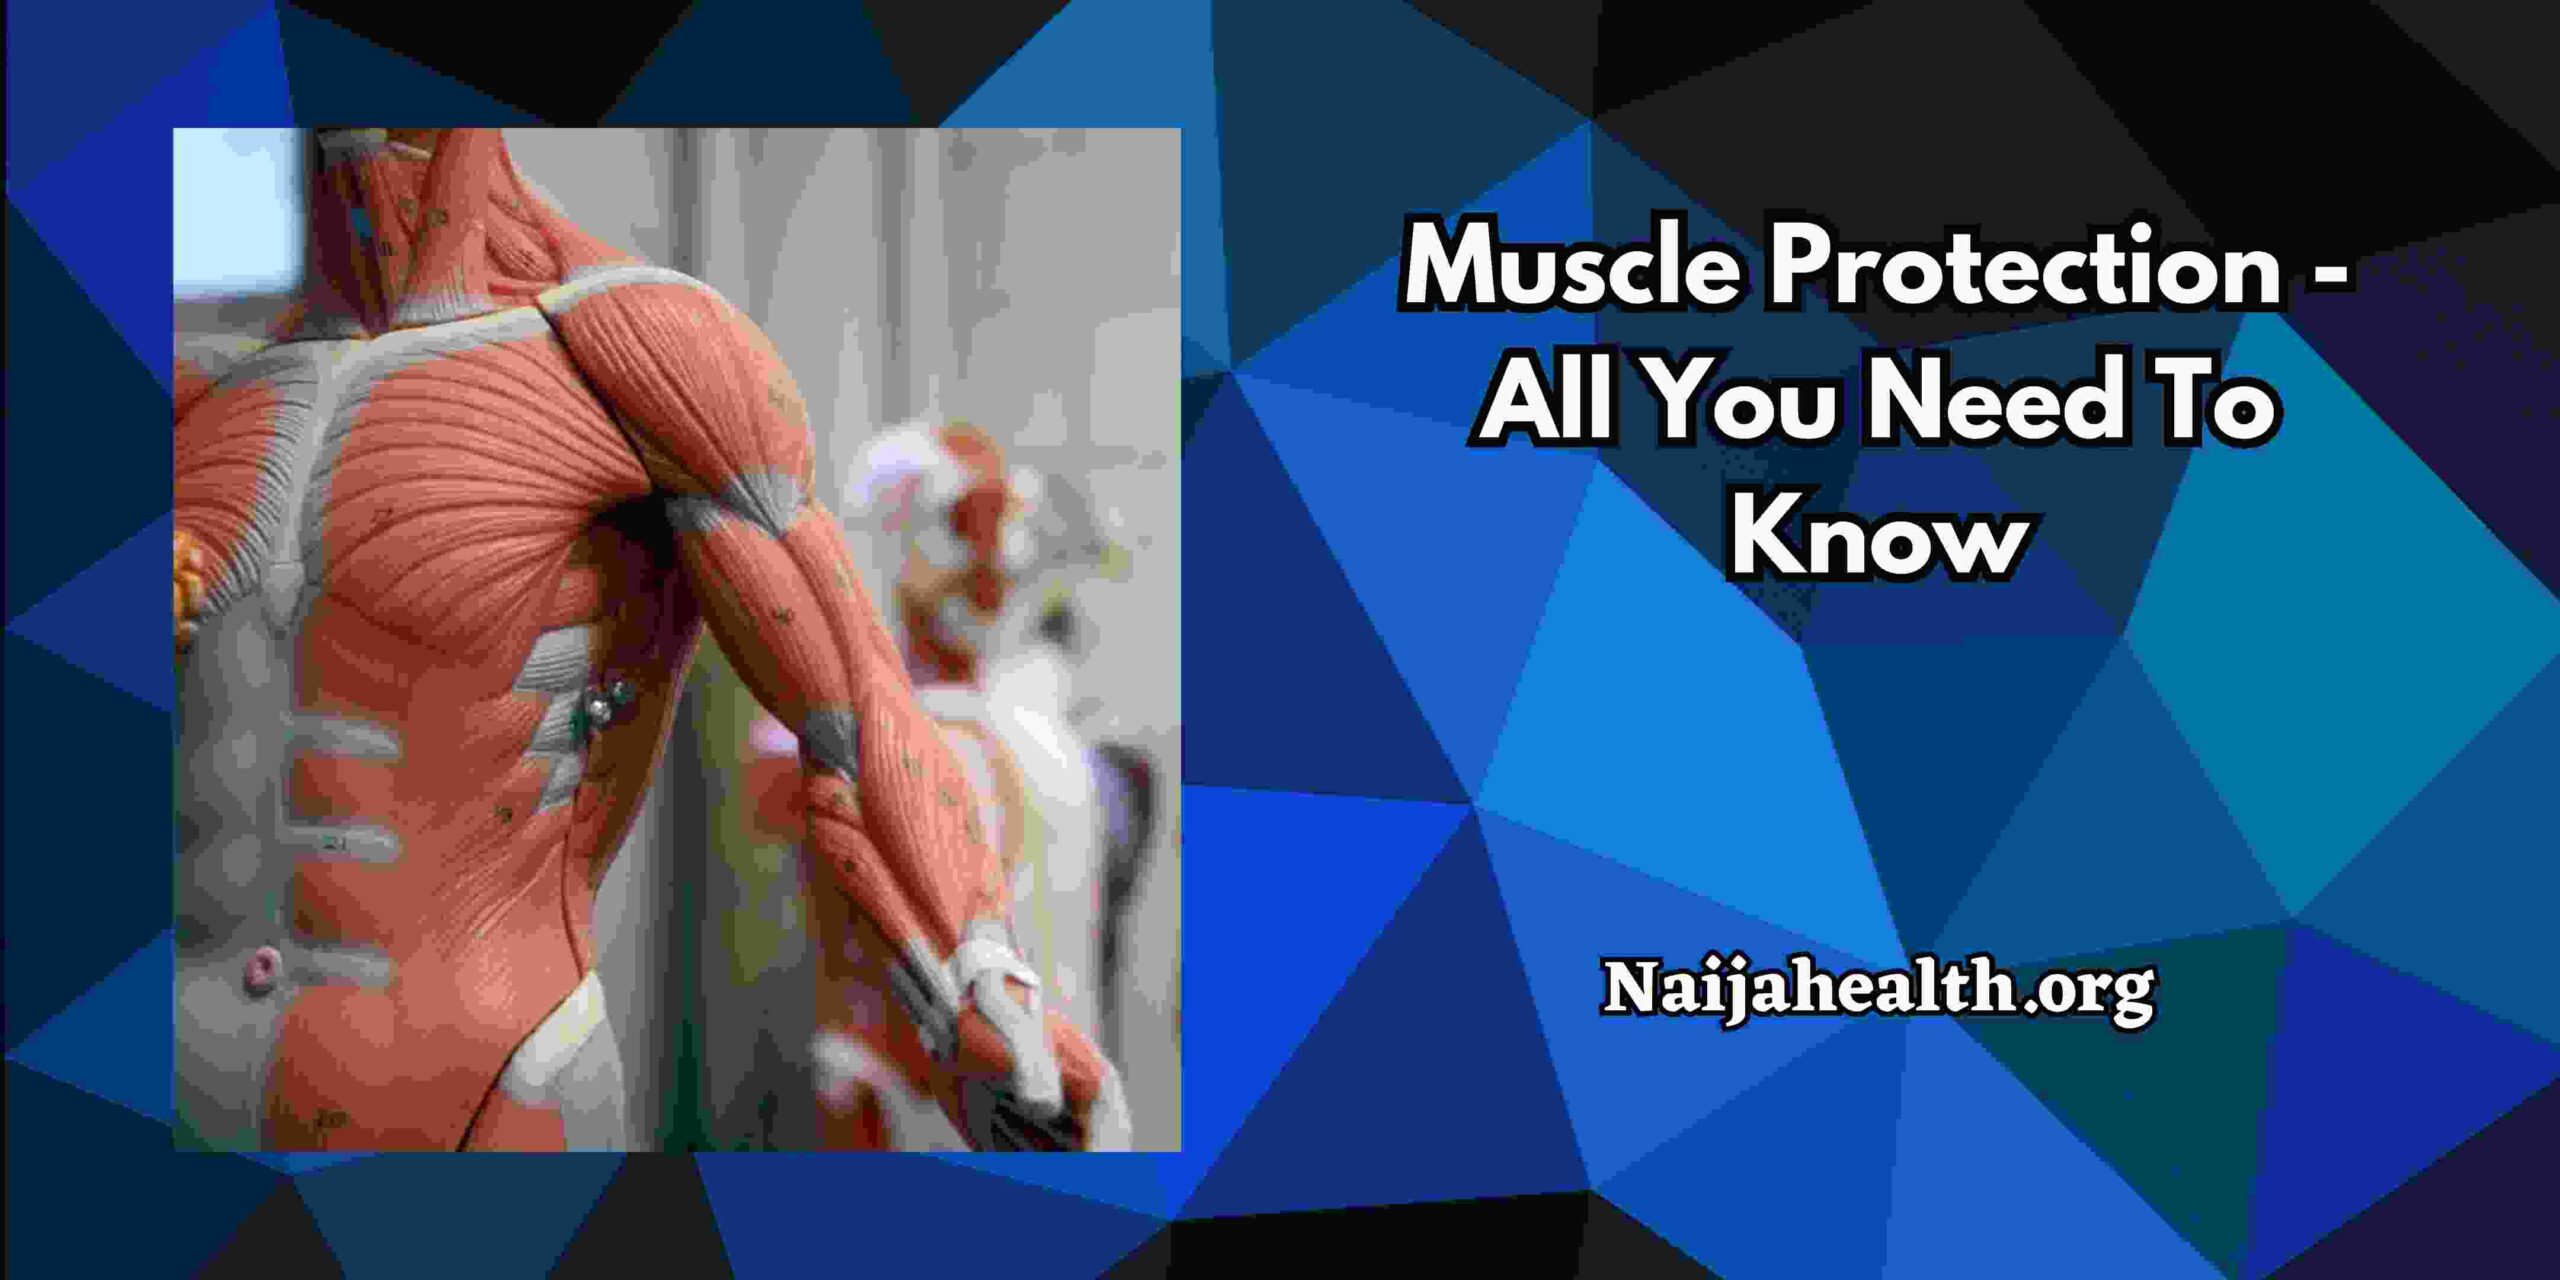 Muscle Protection - All You Need To Know